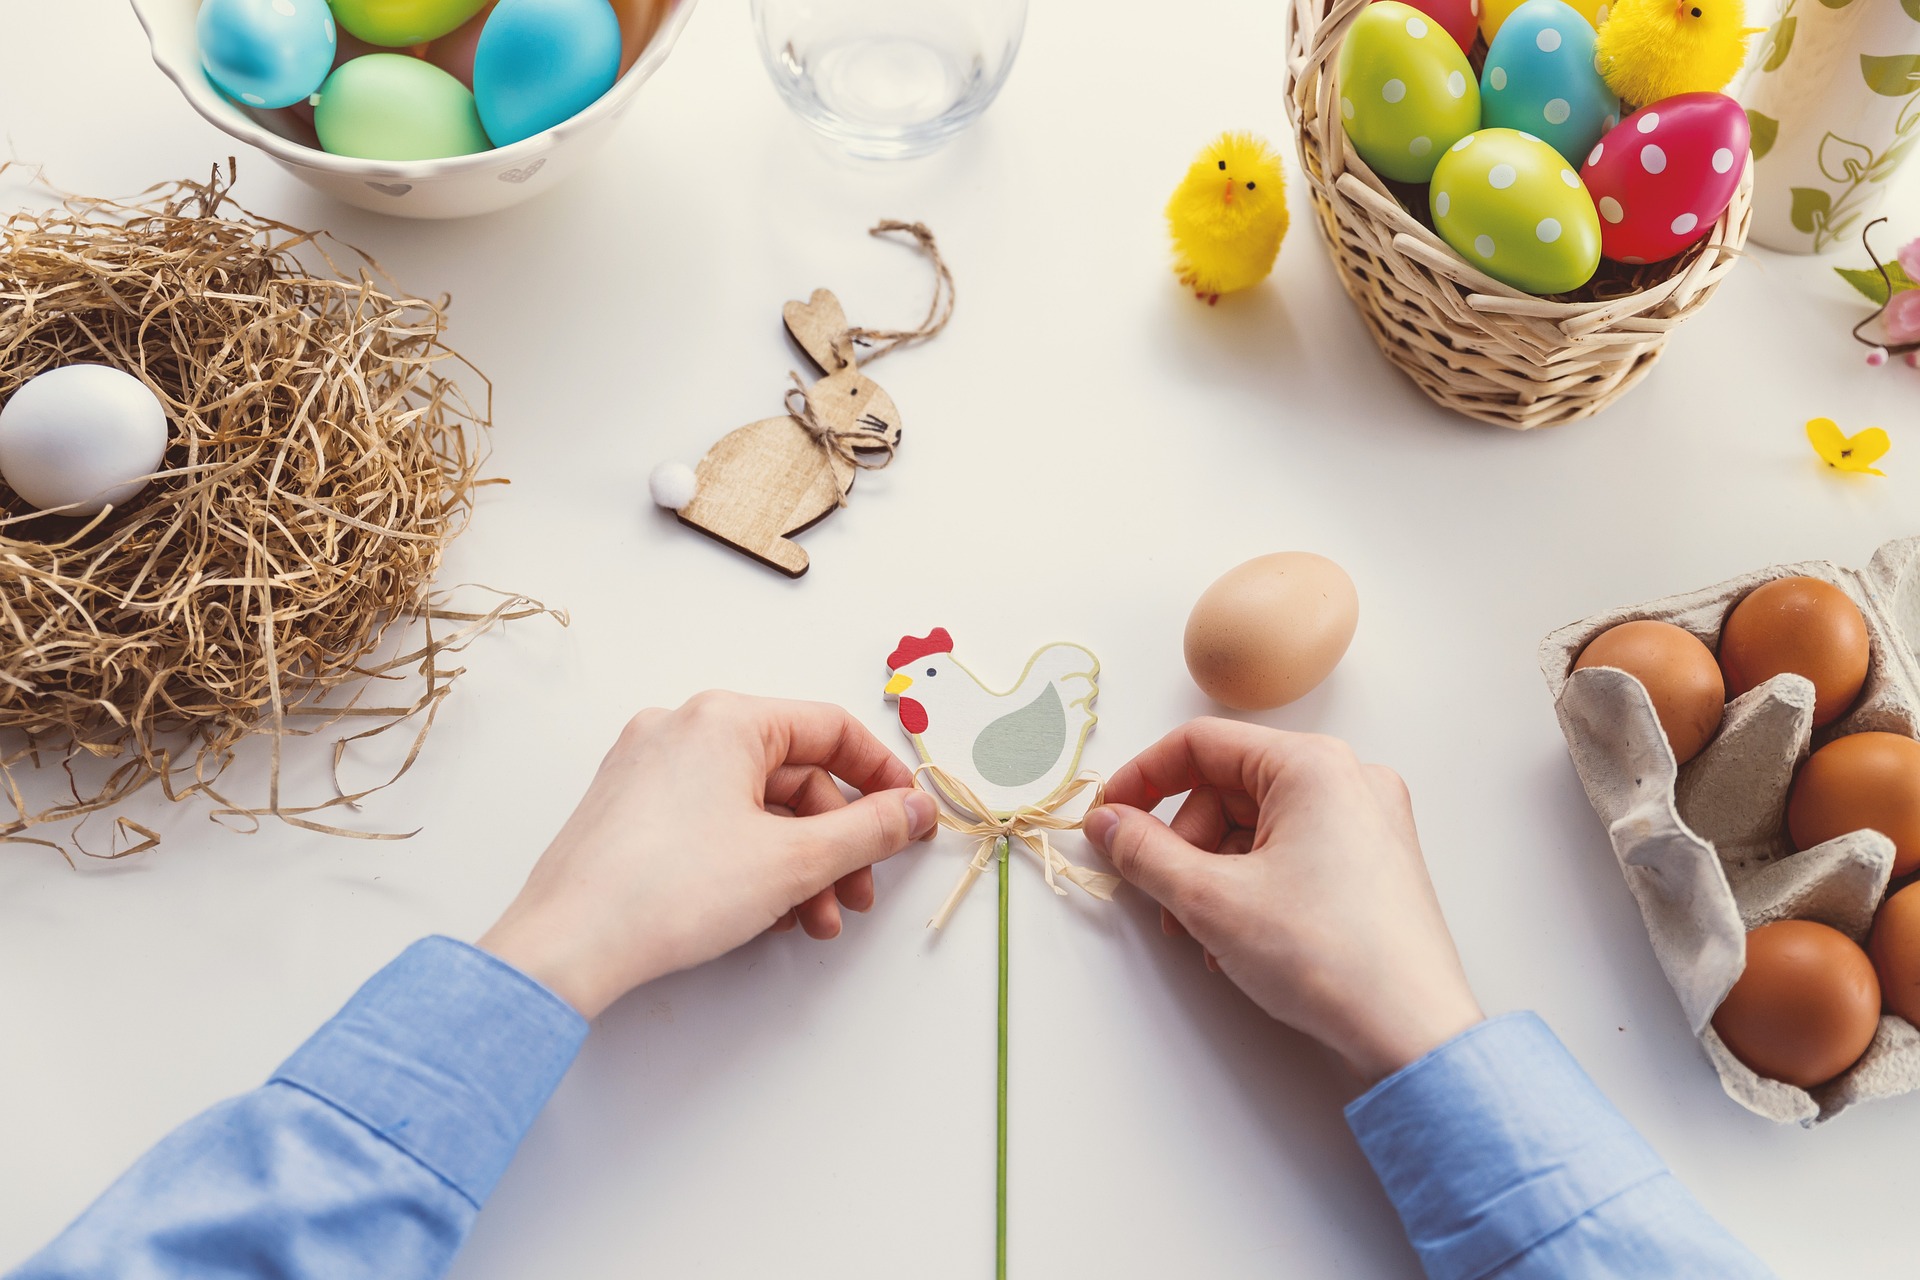 Course Image for 8040C2241 Family Fun:: Easter Crafts (Workshop)